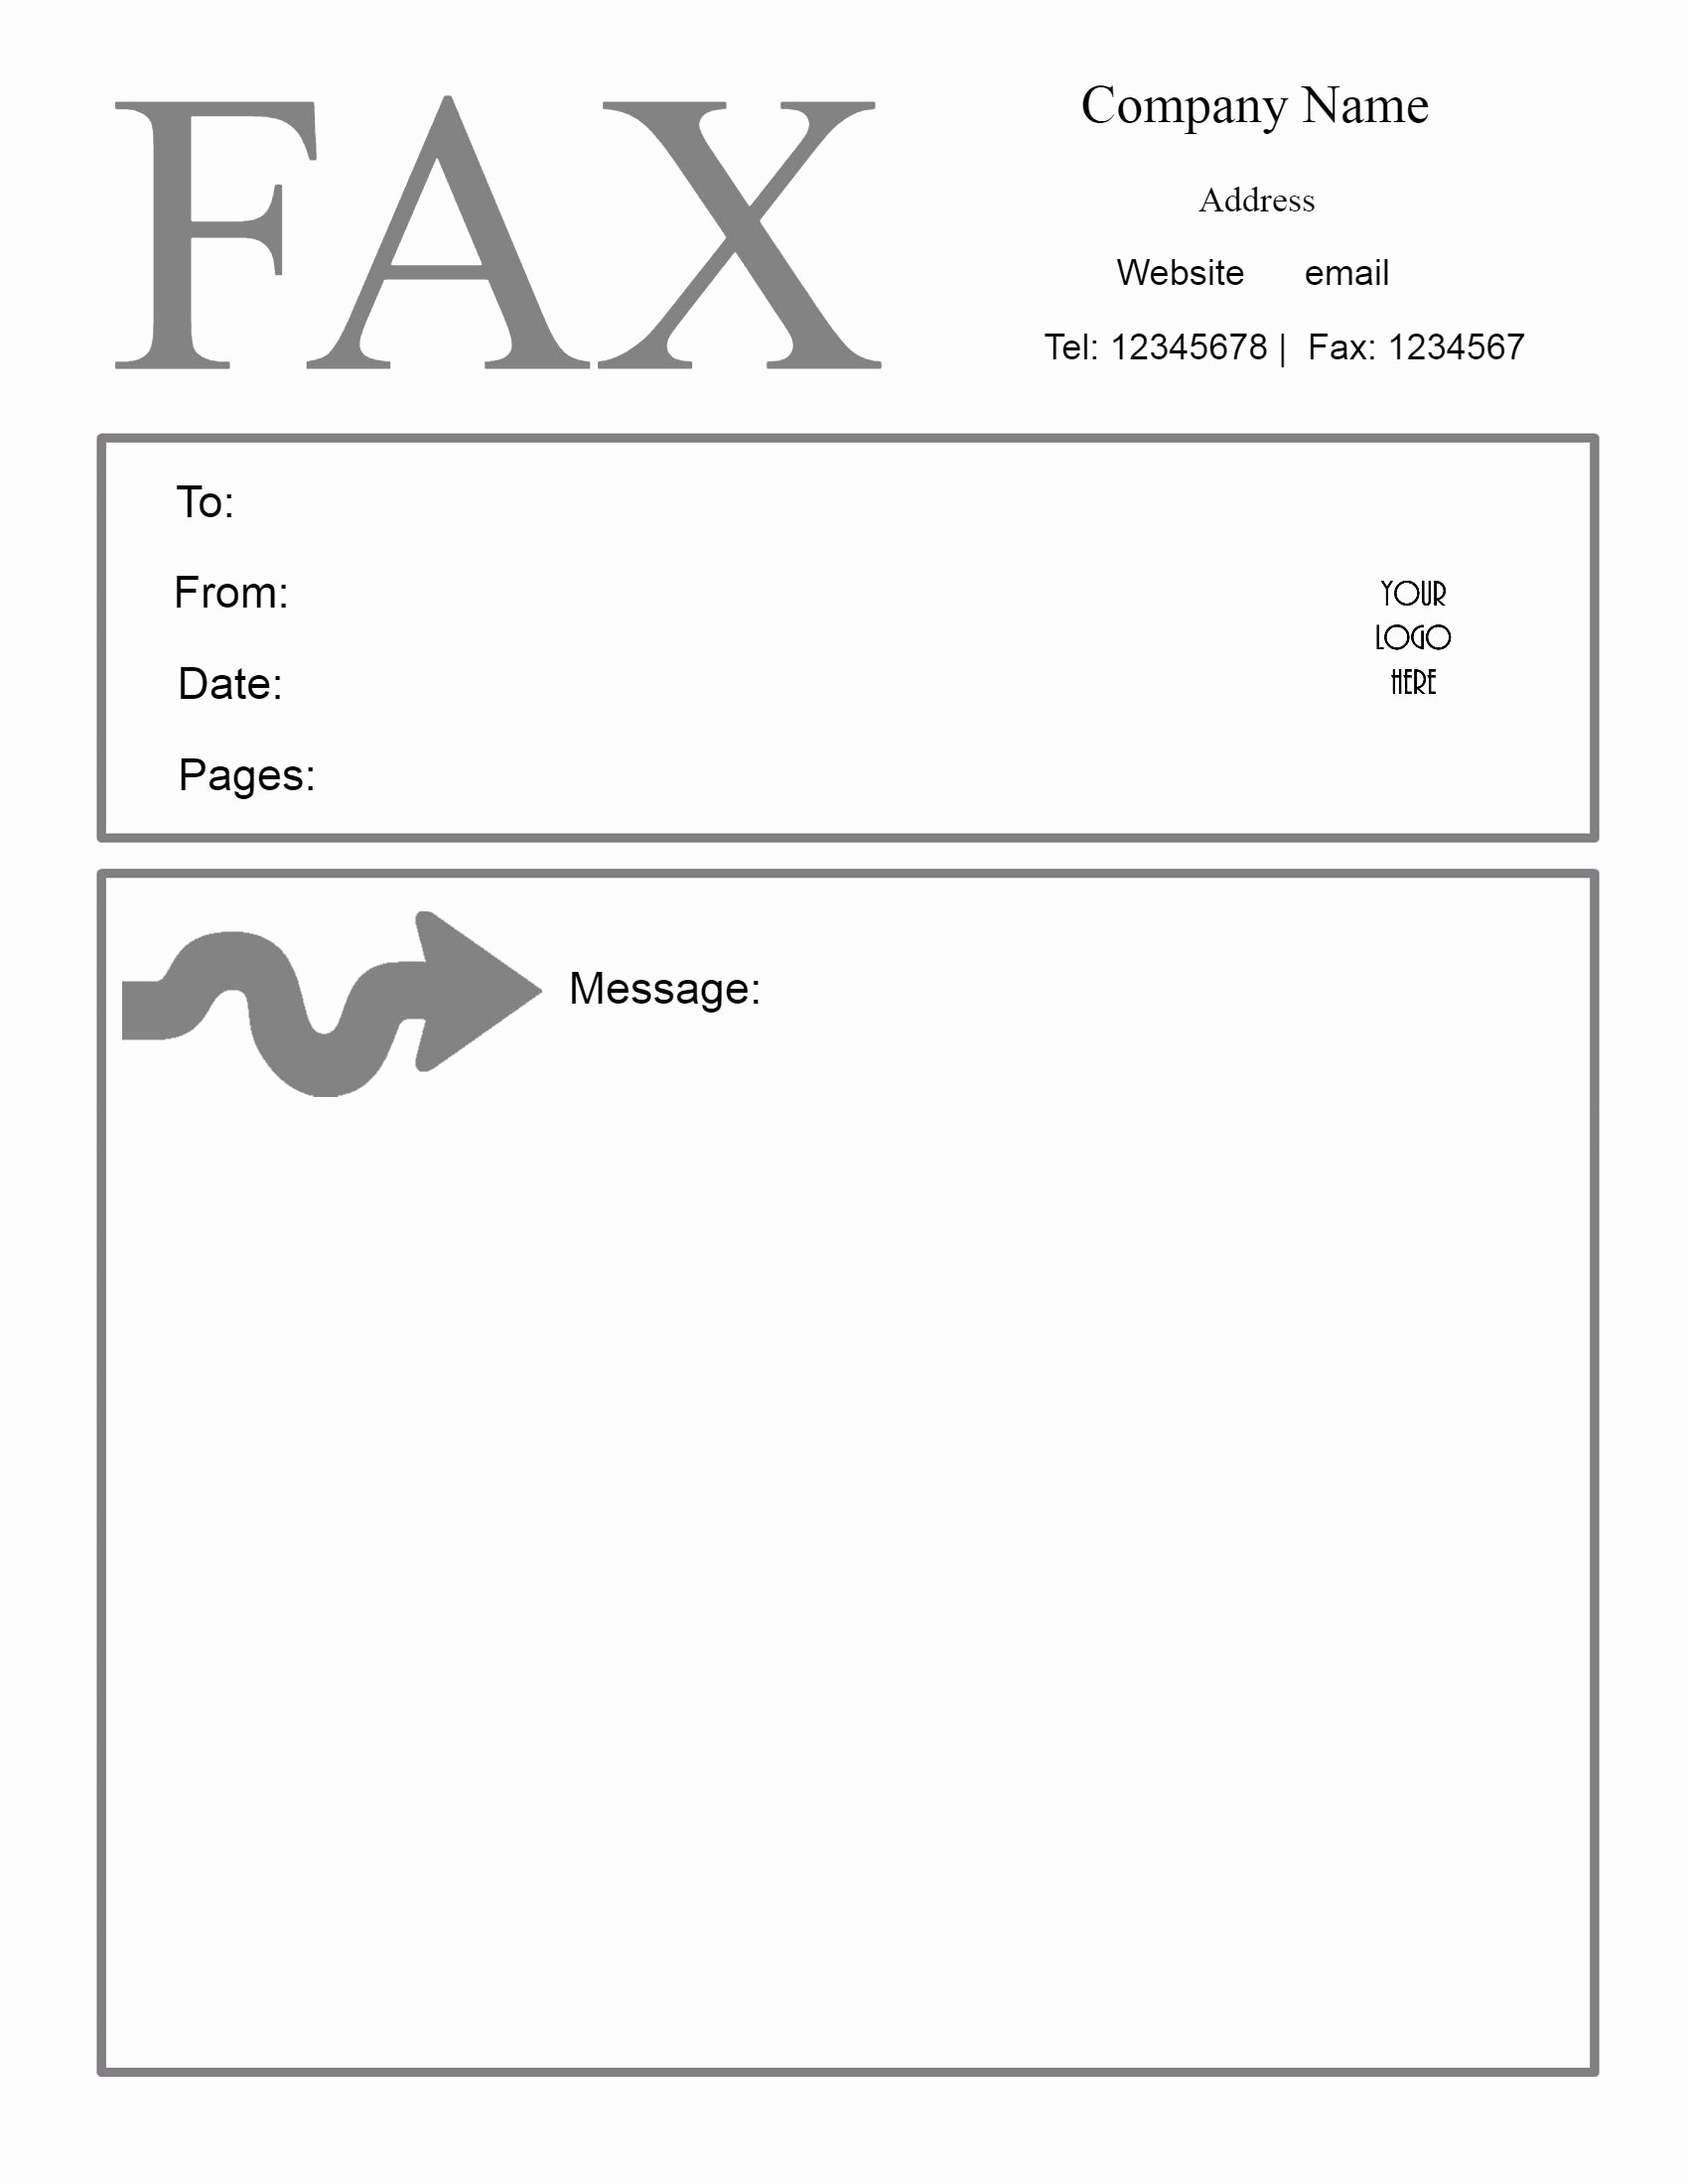 Cover Page for A Fax Fresh Free Fax Cover Letter Template